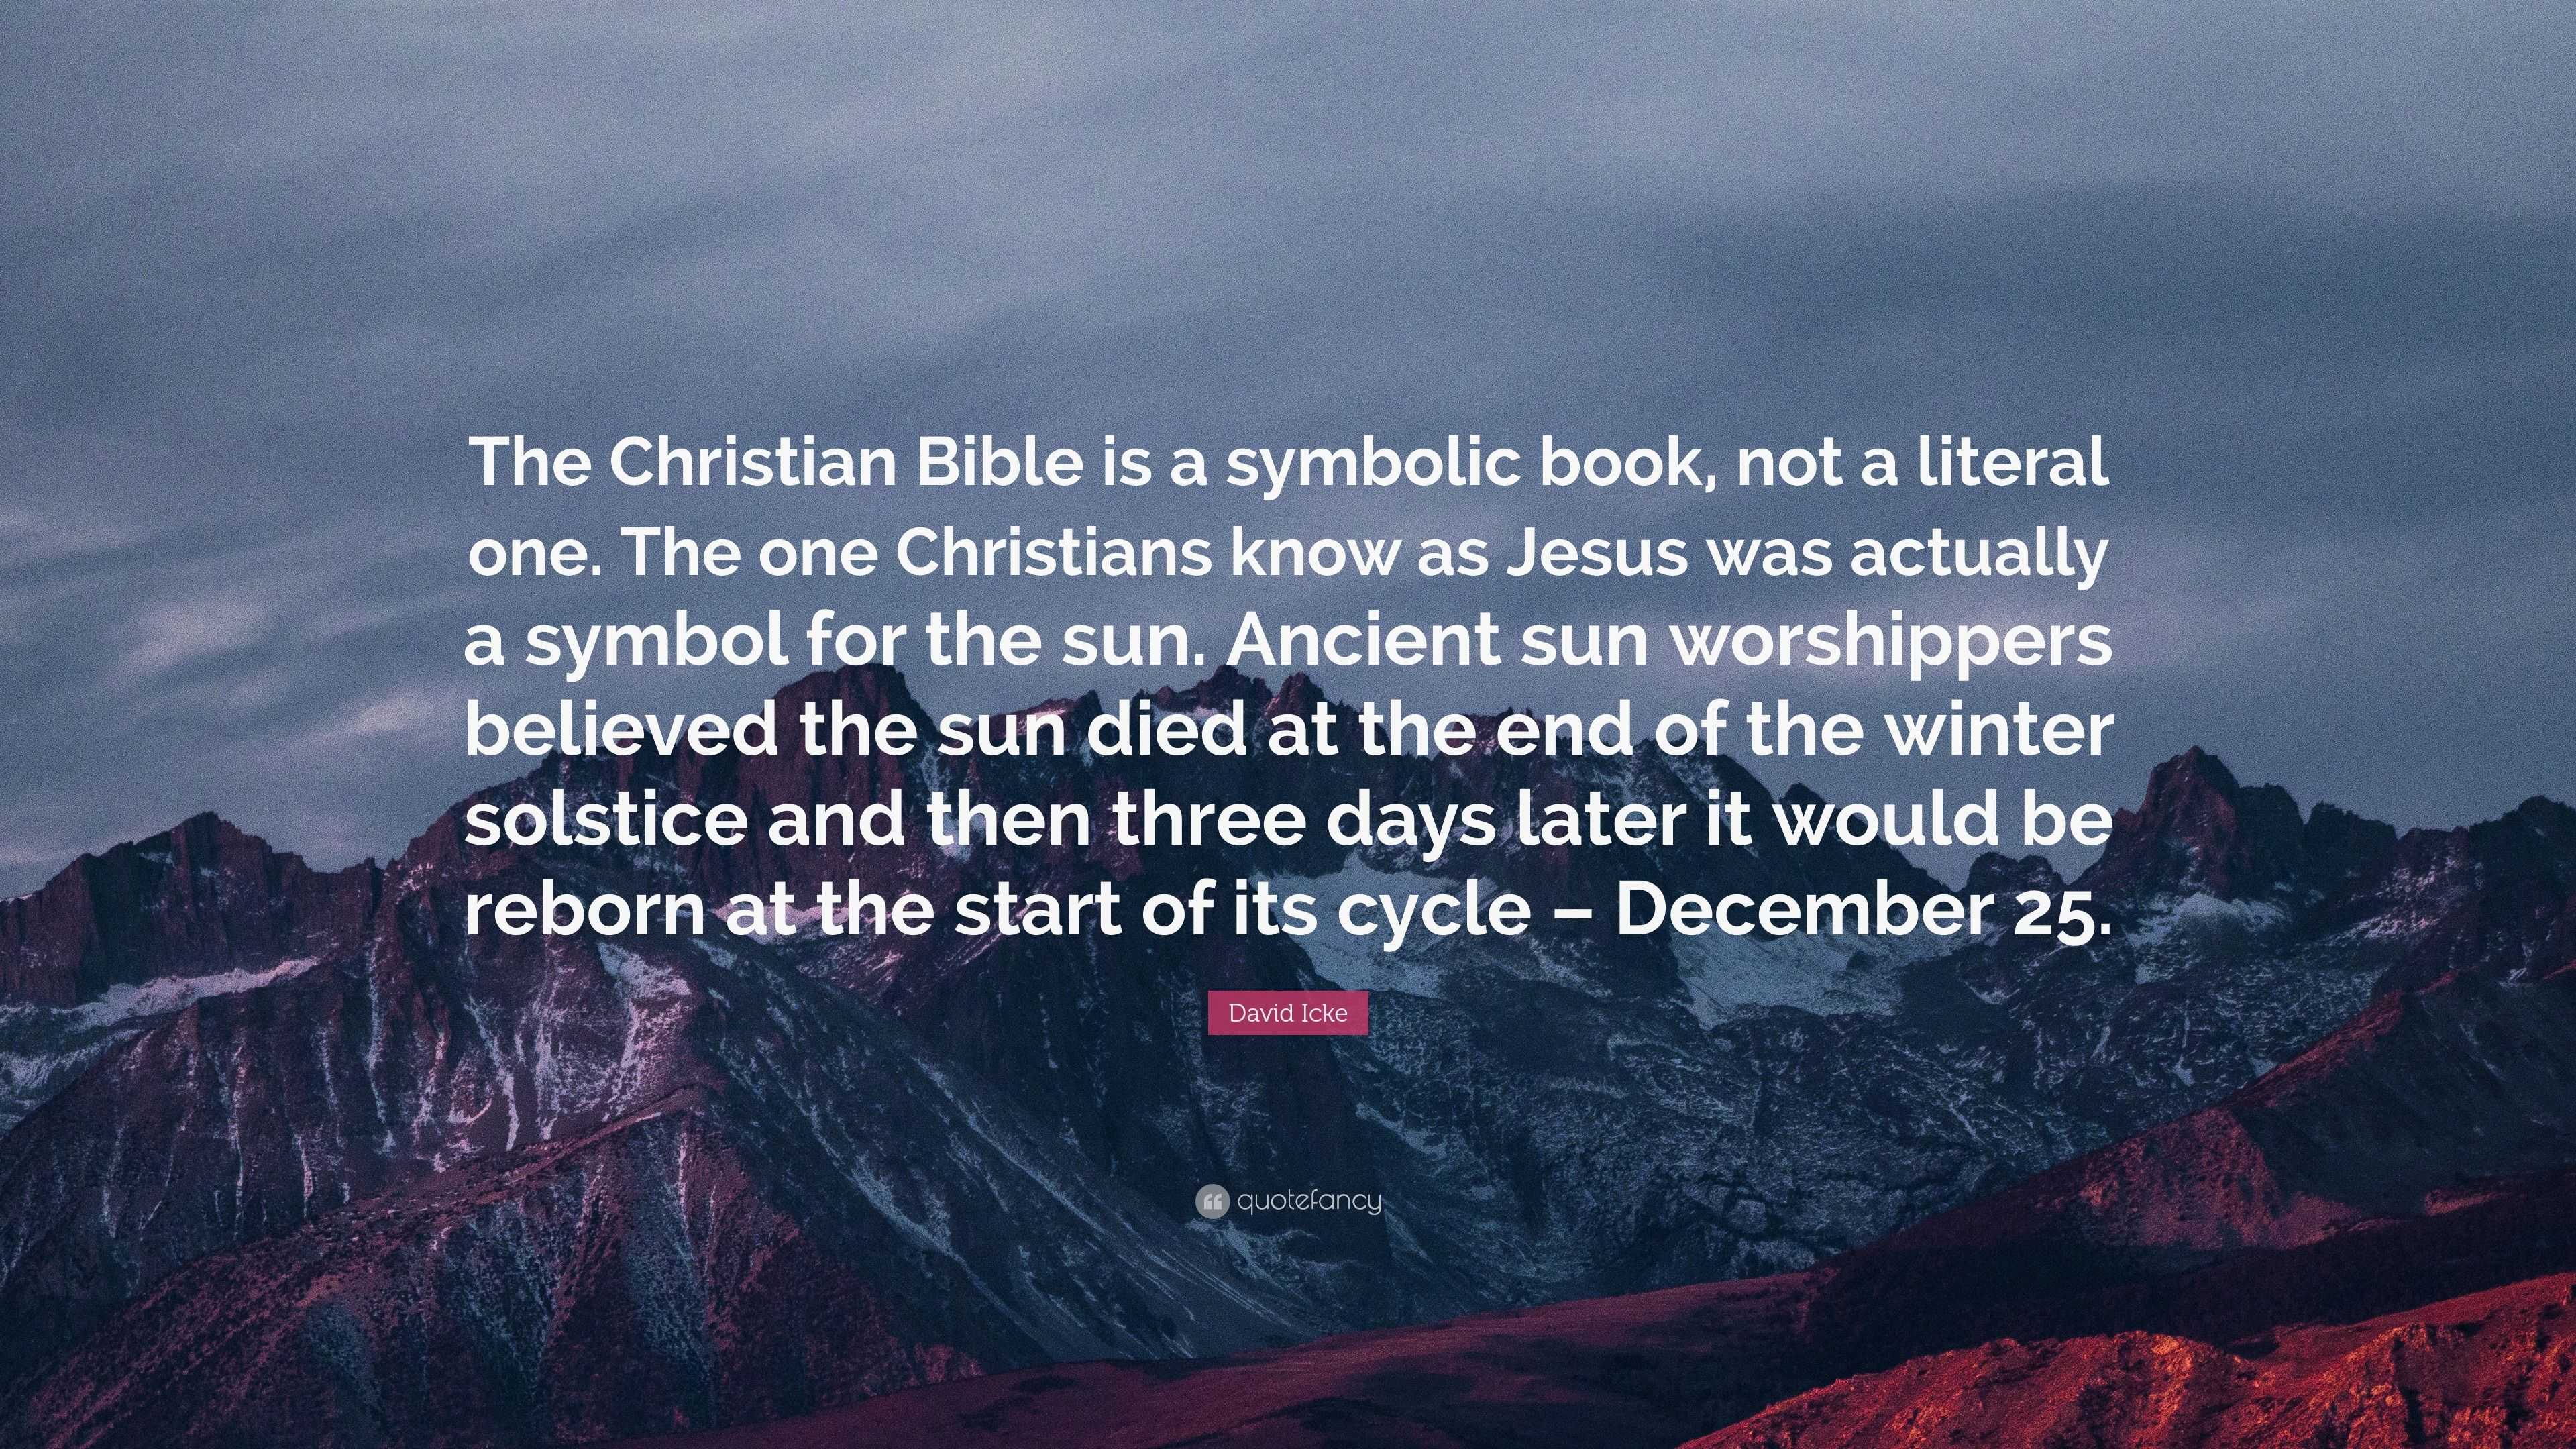 David Icke Quote “The Christian Bible is a symbolic book not a literal